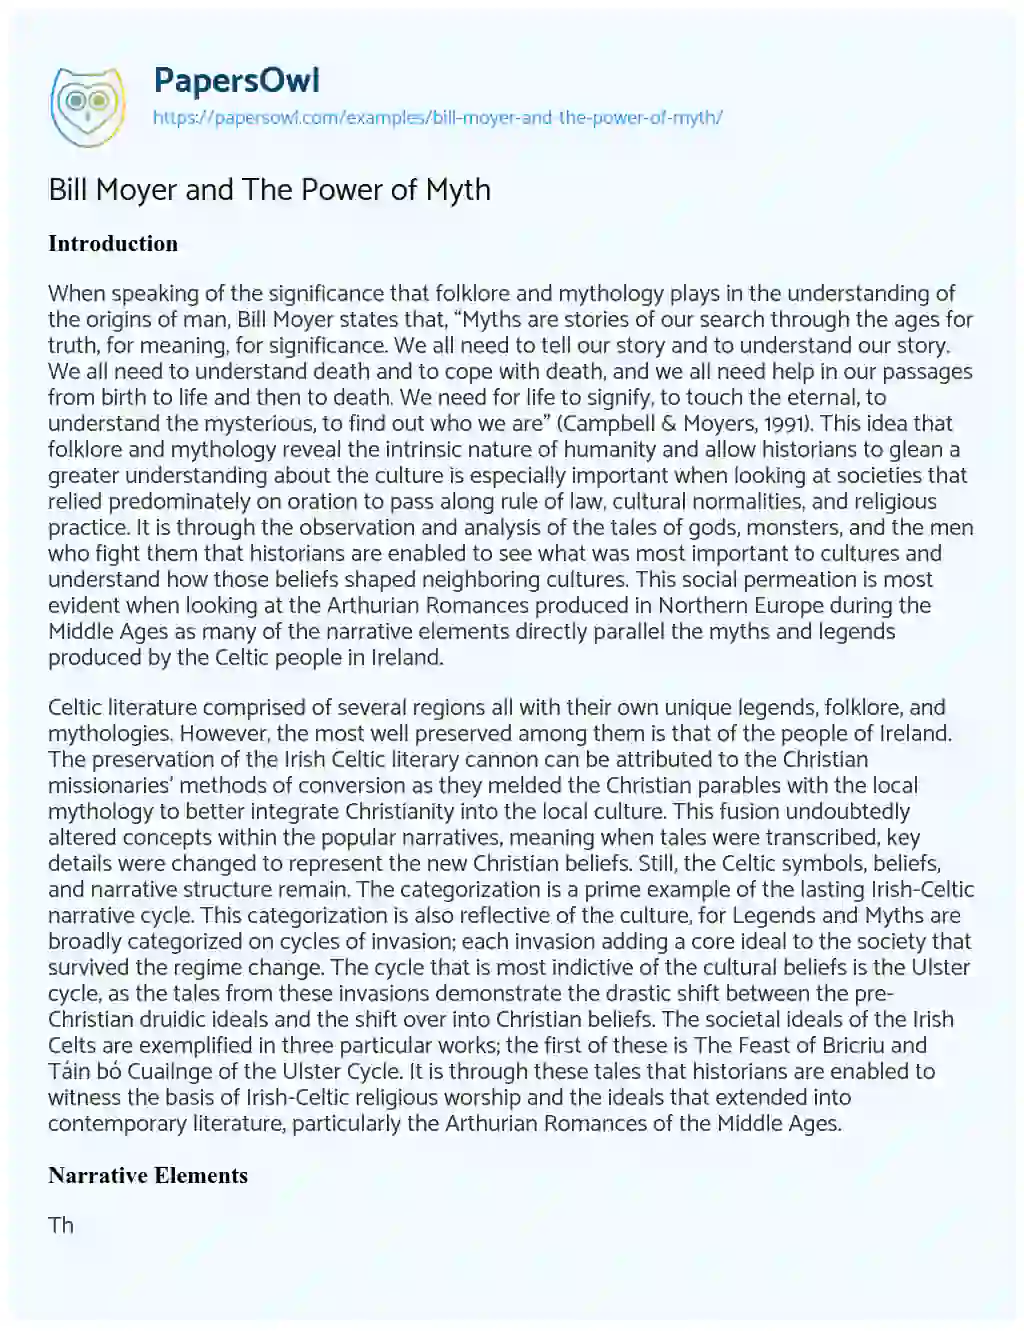 Essay on Bill Moyer and the Power of Myth